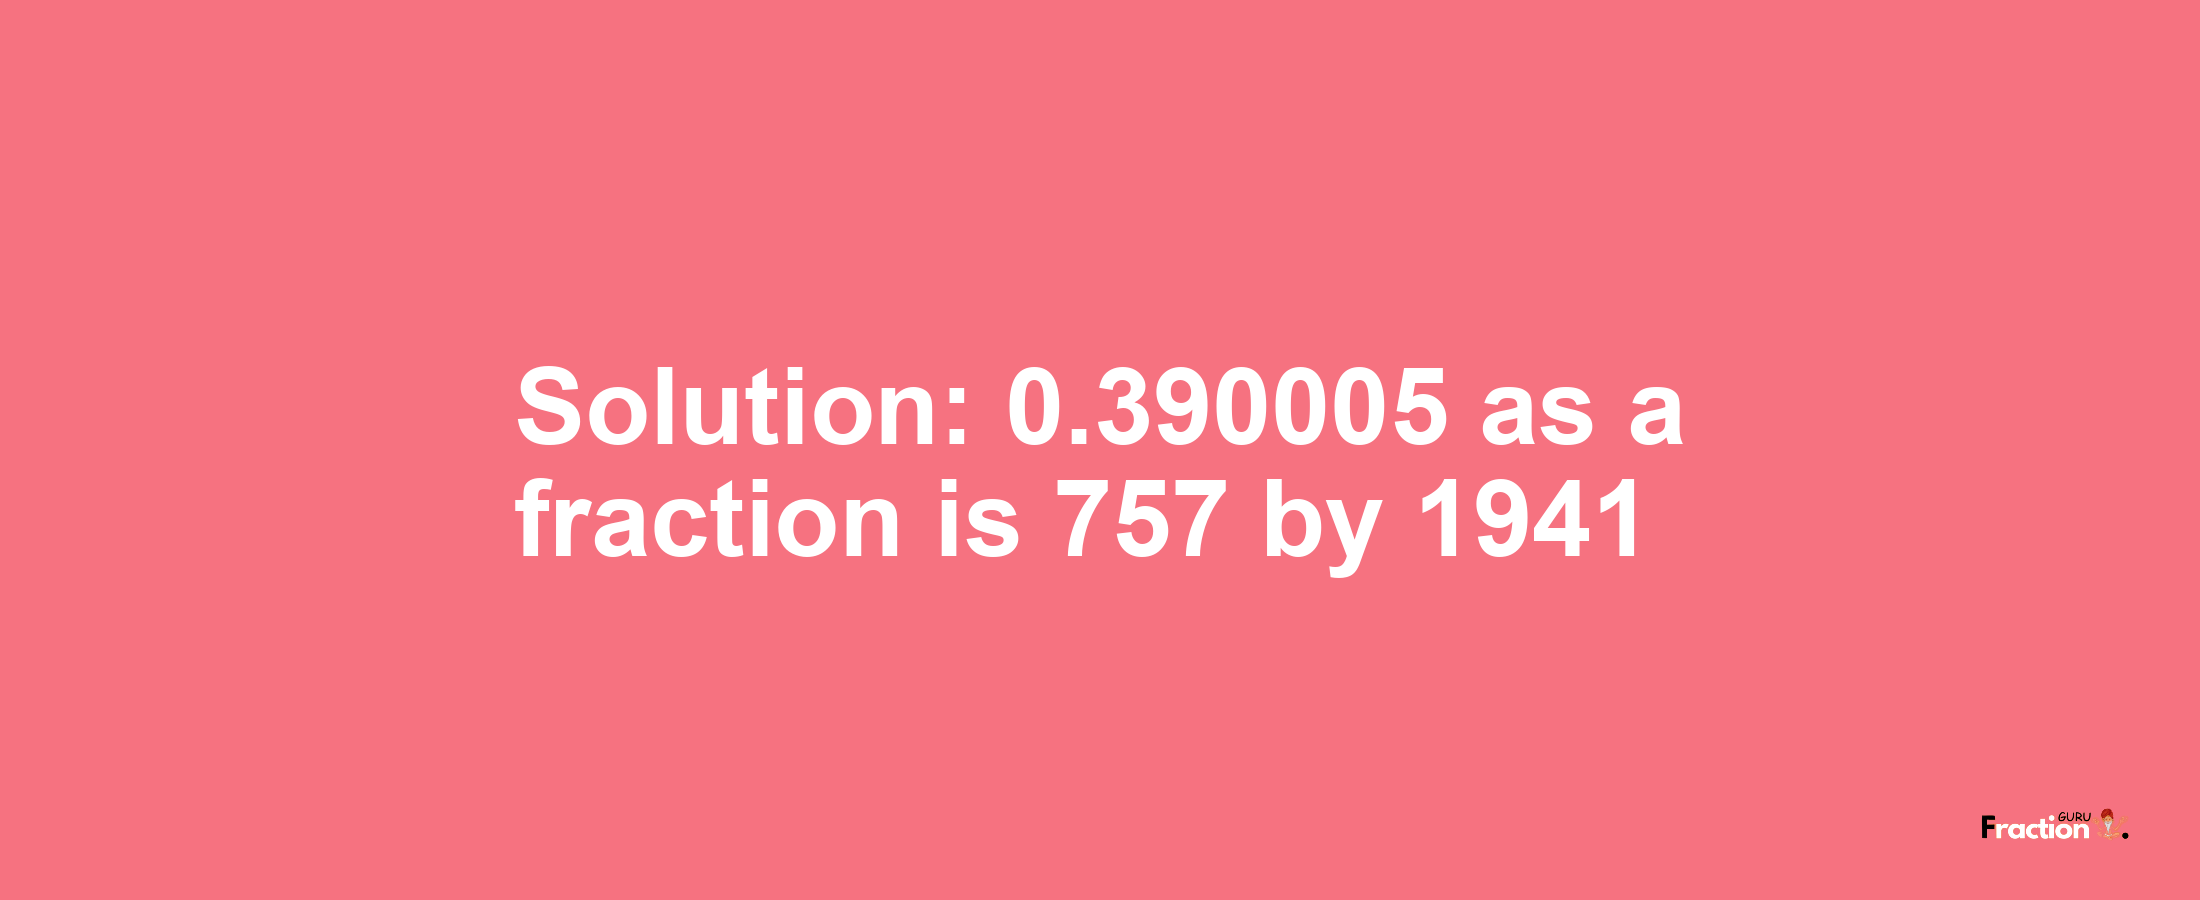 Solution:0.390005 as a fraction is 757/1941